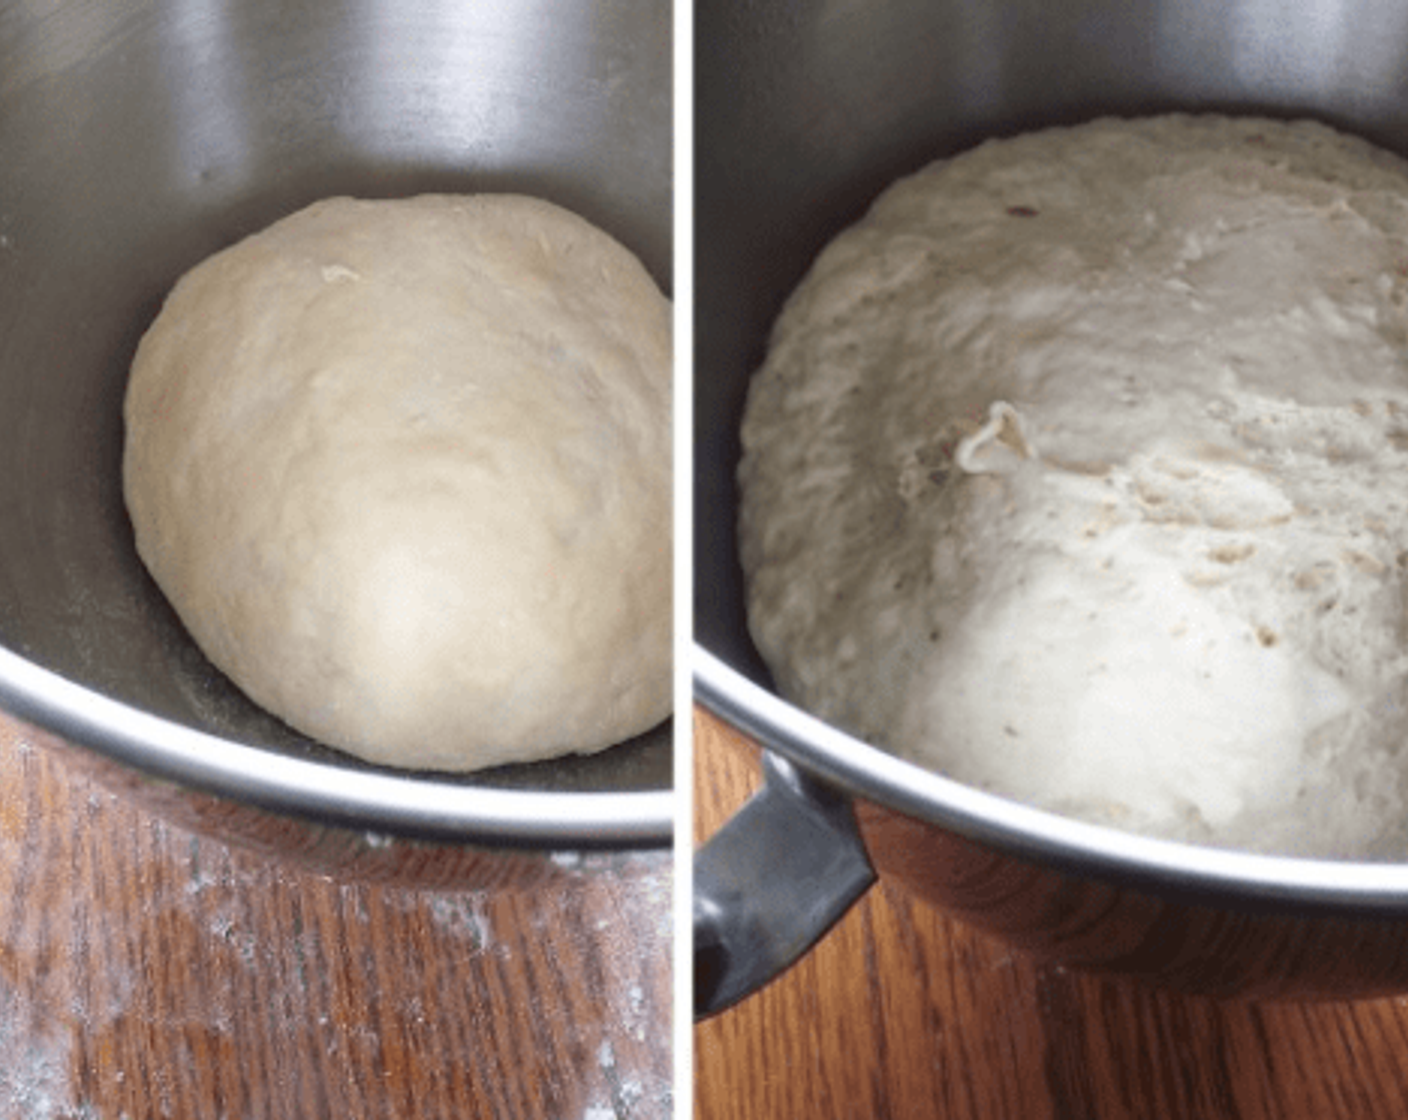 step 4 Lightly brush a large bowl with oil and turn the dough to coat. Cover the bowl with a damp dish towel. Let rise in a warm place for 1 hour, until the dough has doubled in size. Punch the dough down, and let it rest for another 10 minutes.